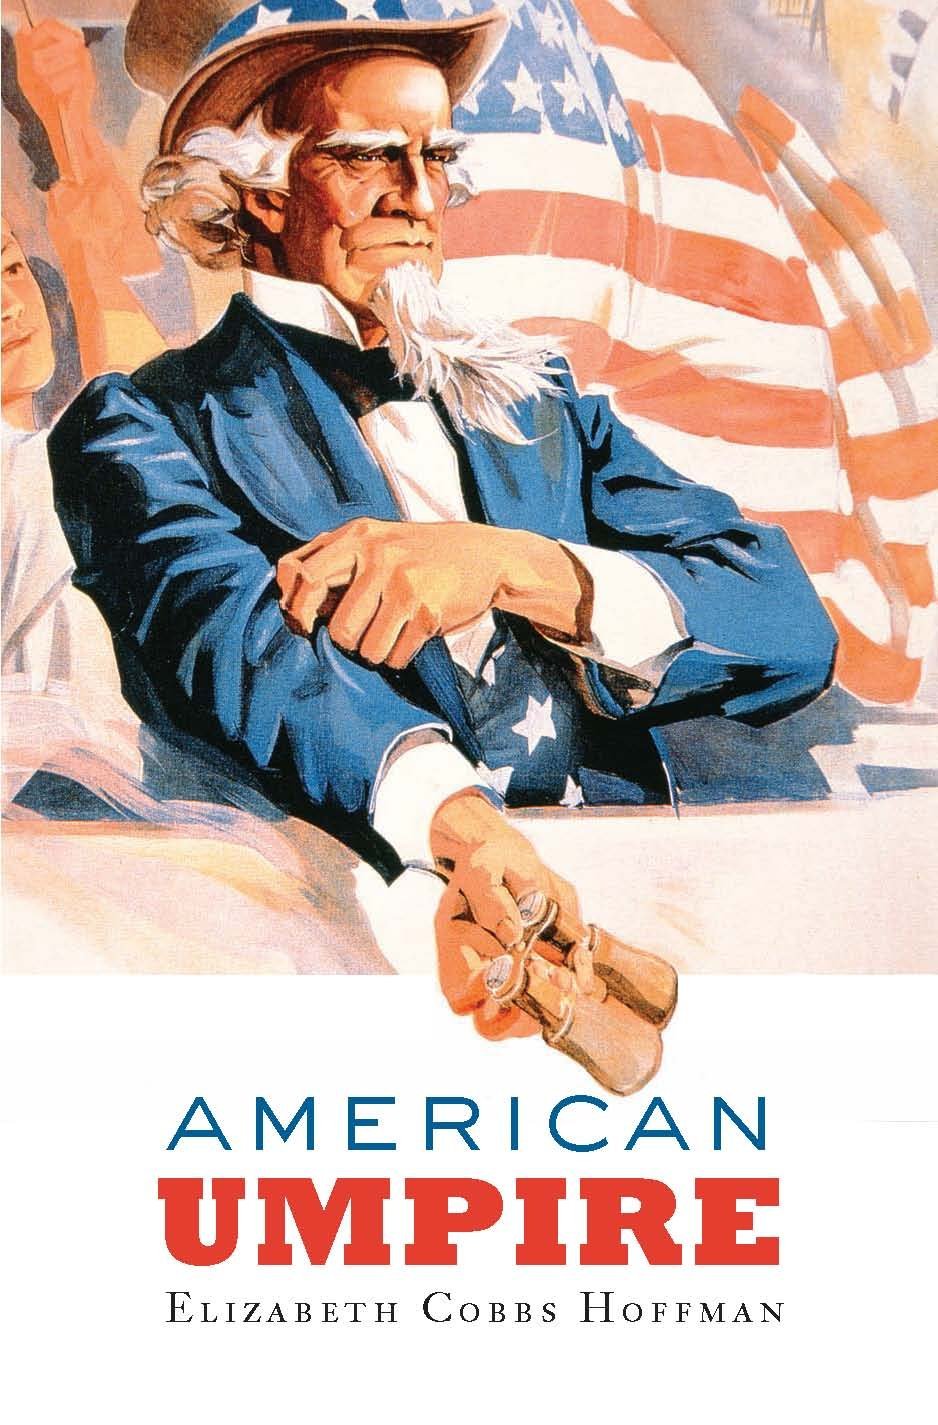 Book Cover for American Umpire by Elizabeth Cobbs Hoffman